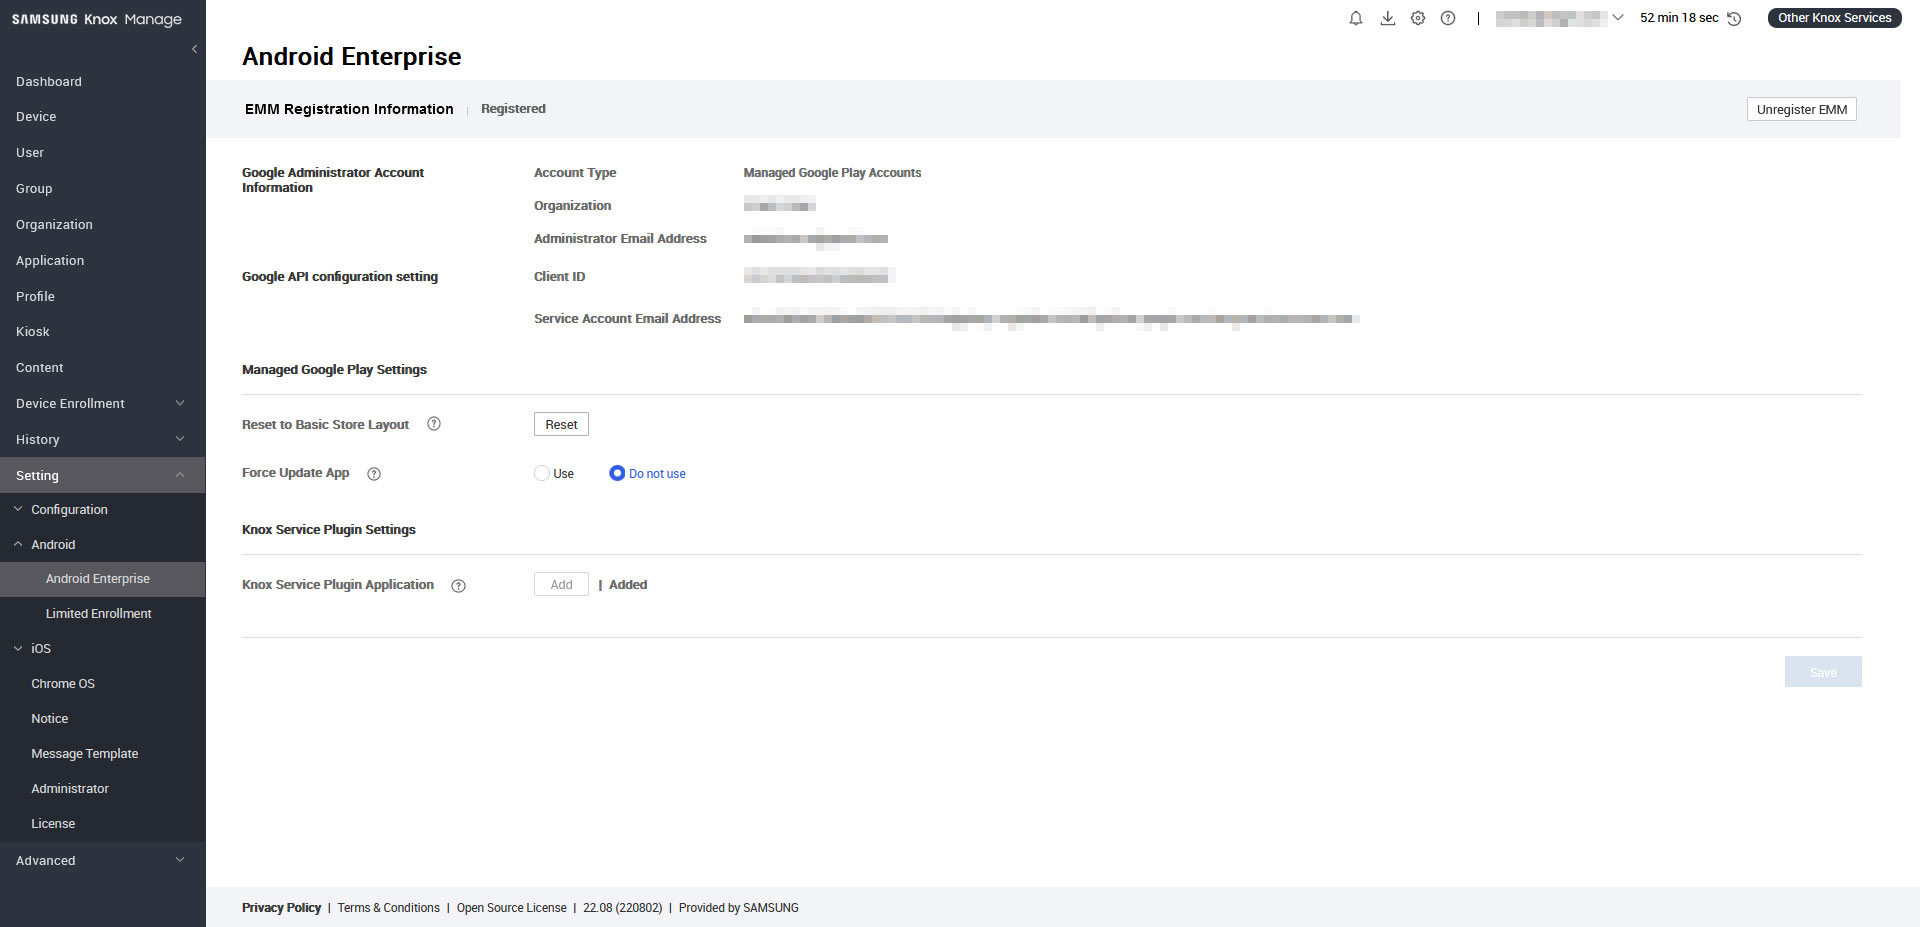 The Google Play account information and Google API settings on the Android Enterprise page of the Knox Manage console